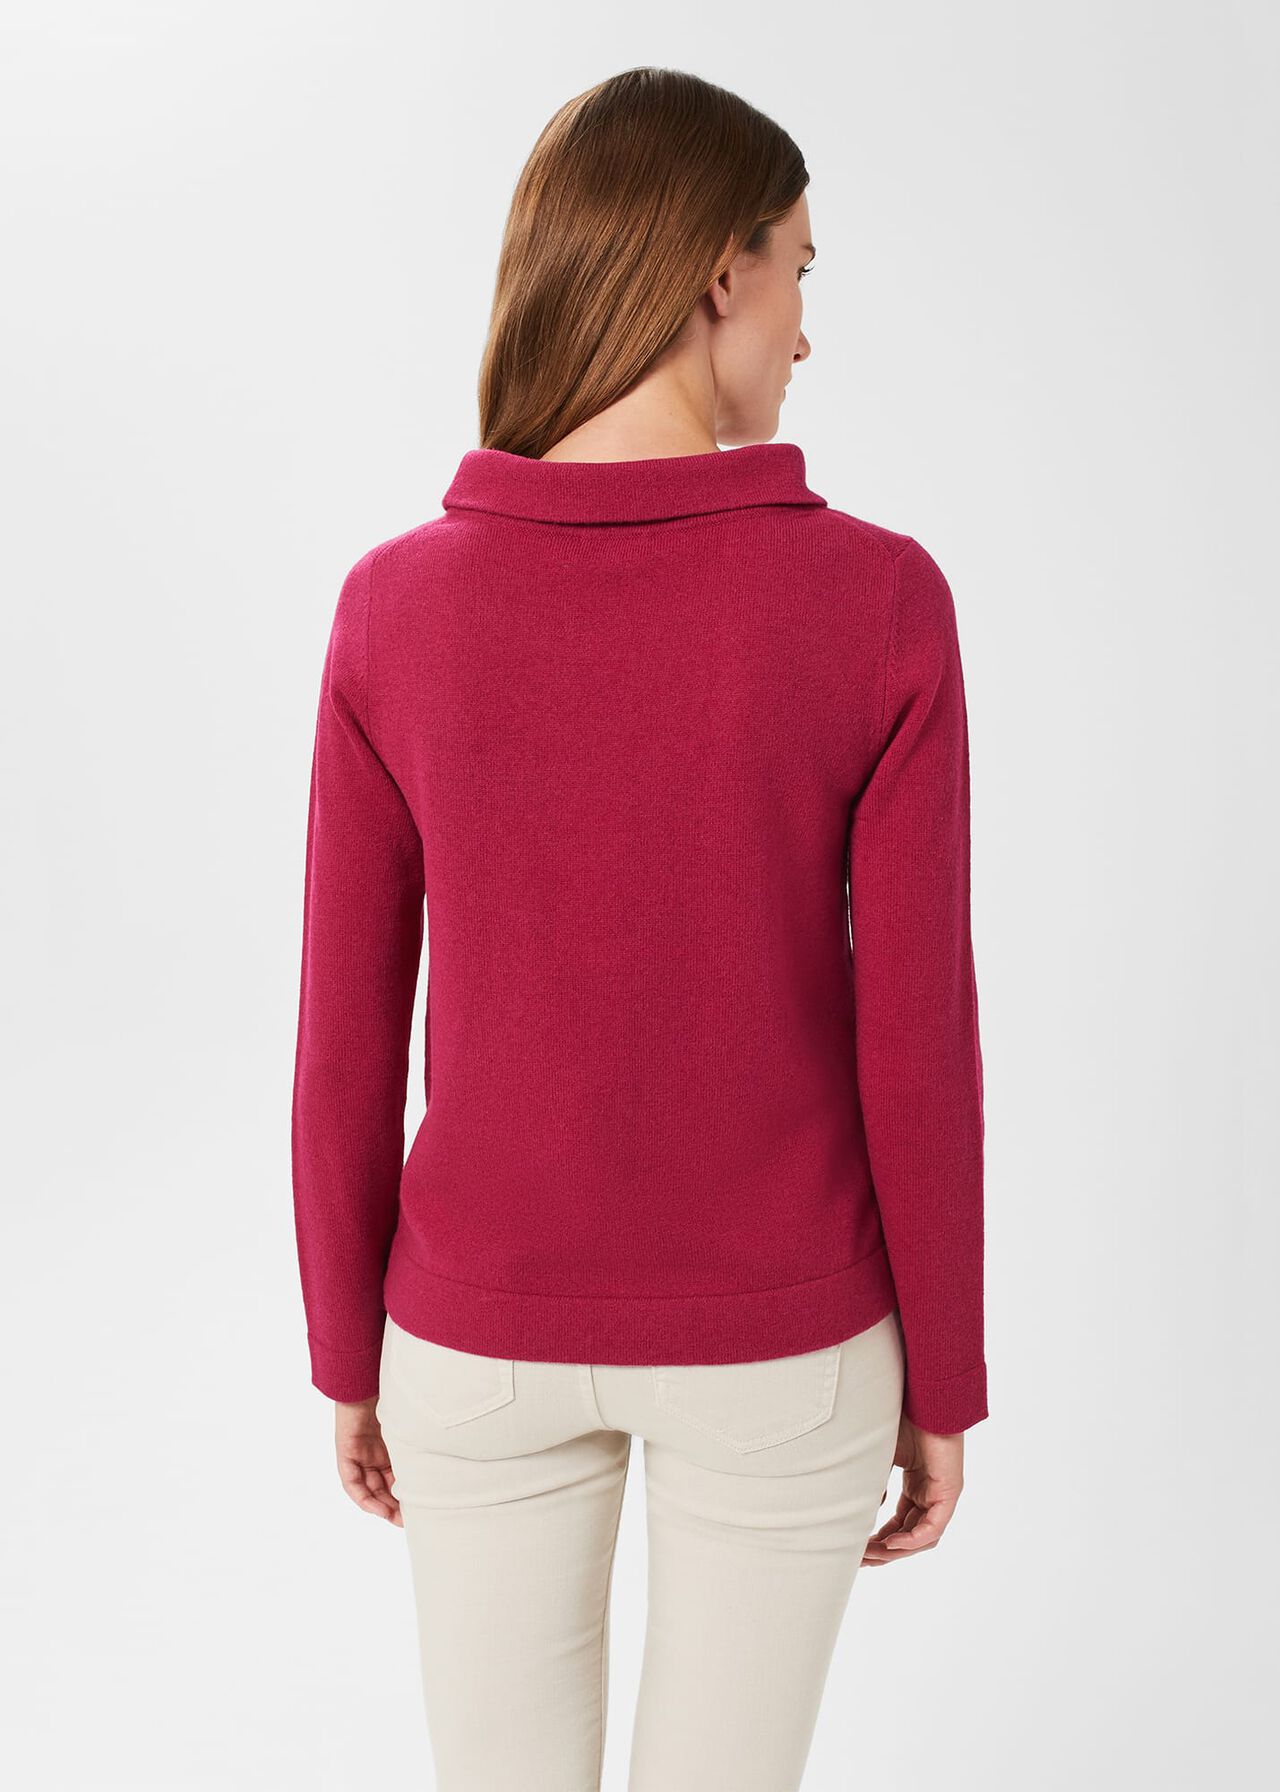 Audrey Wool Cashmere Jumper, Rich Berry Red, hi-res